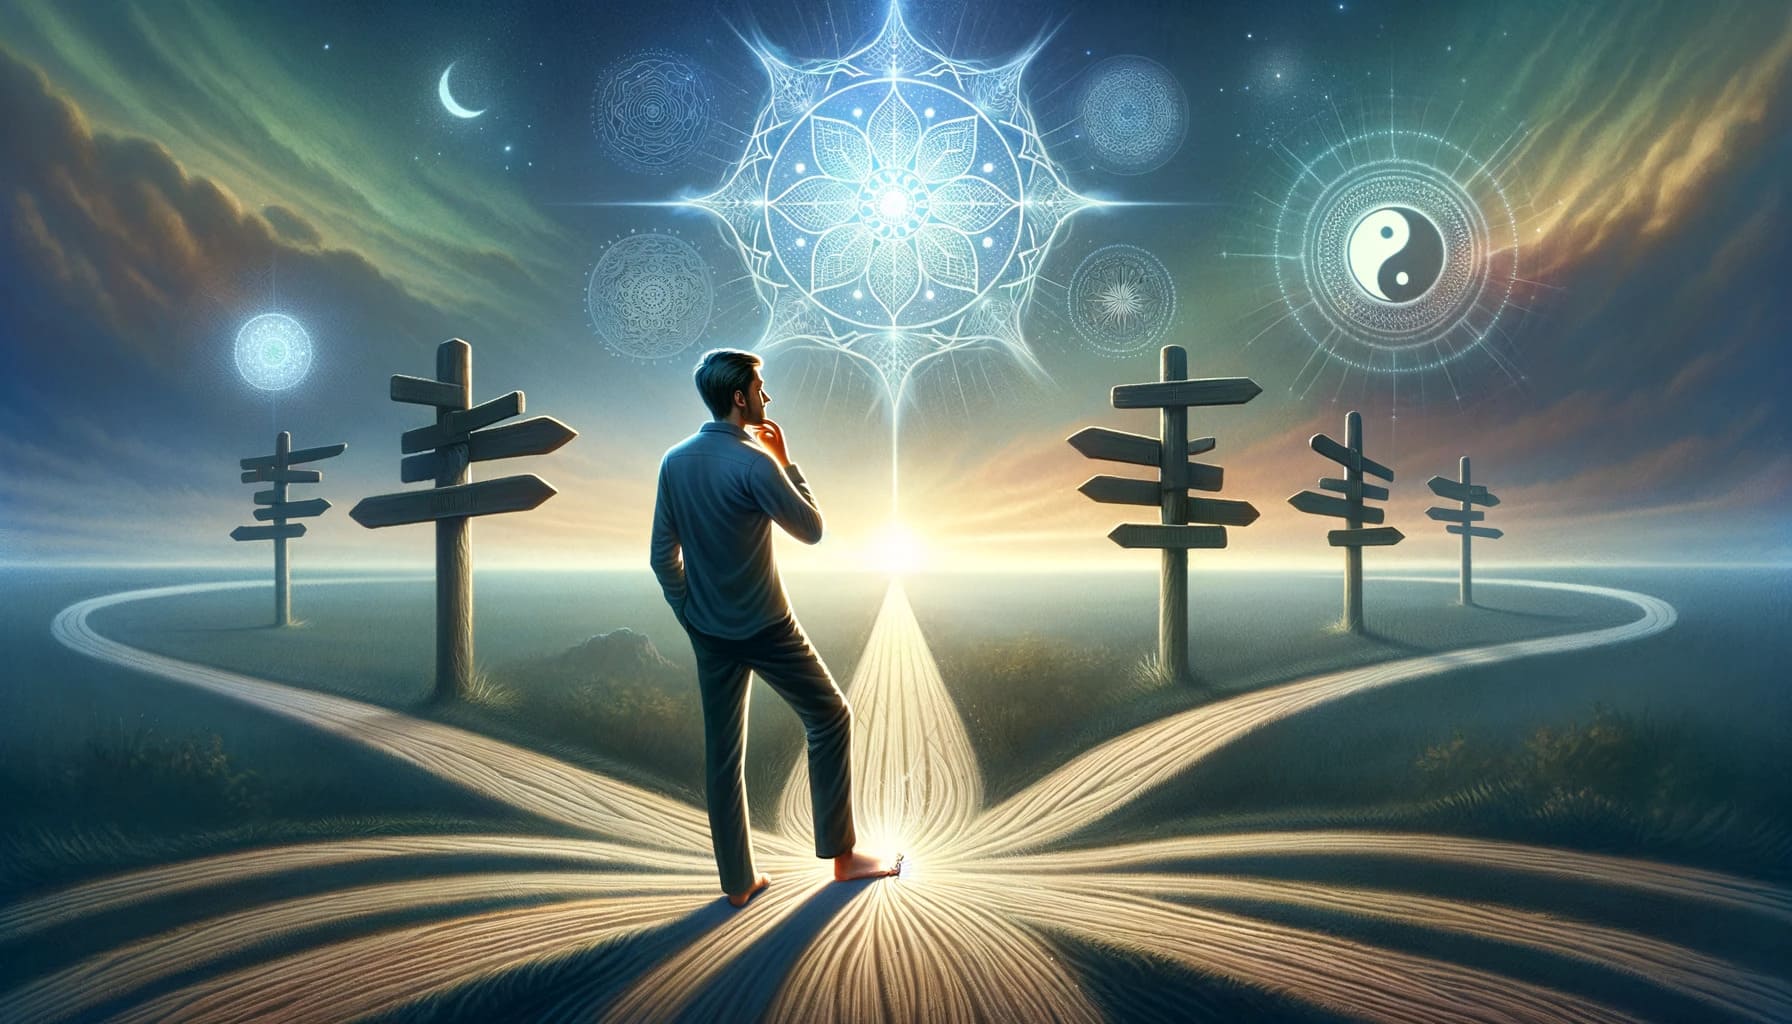 Spiritual Prompt In the center a person is standing at a crossroads looking thoughtful. They are touch